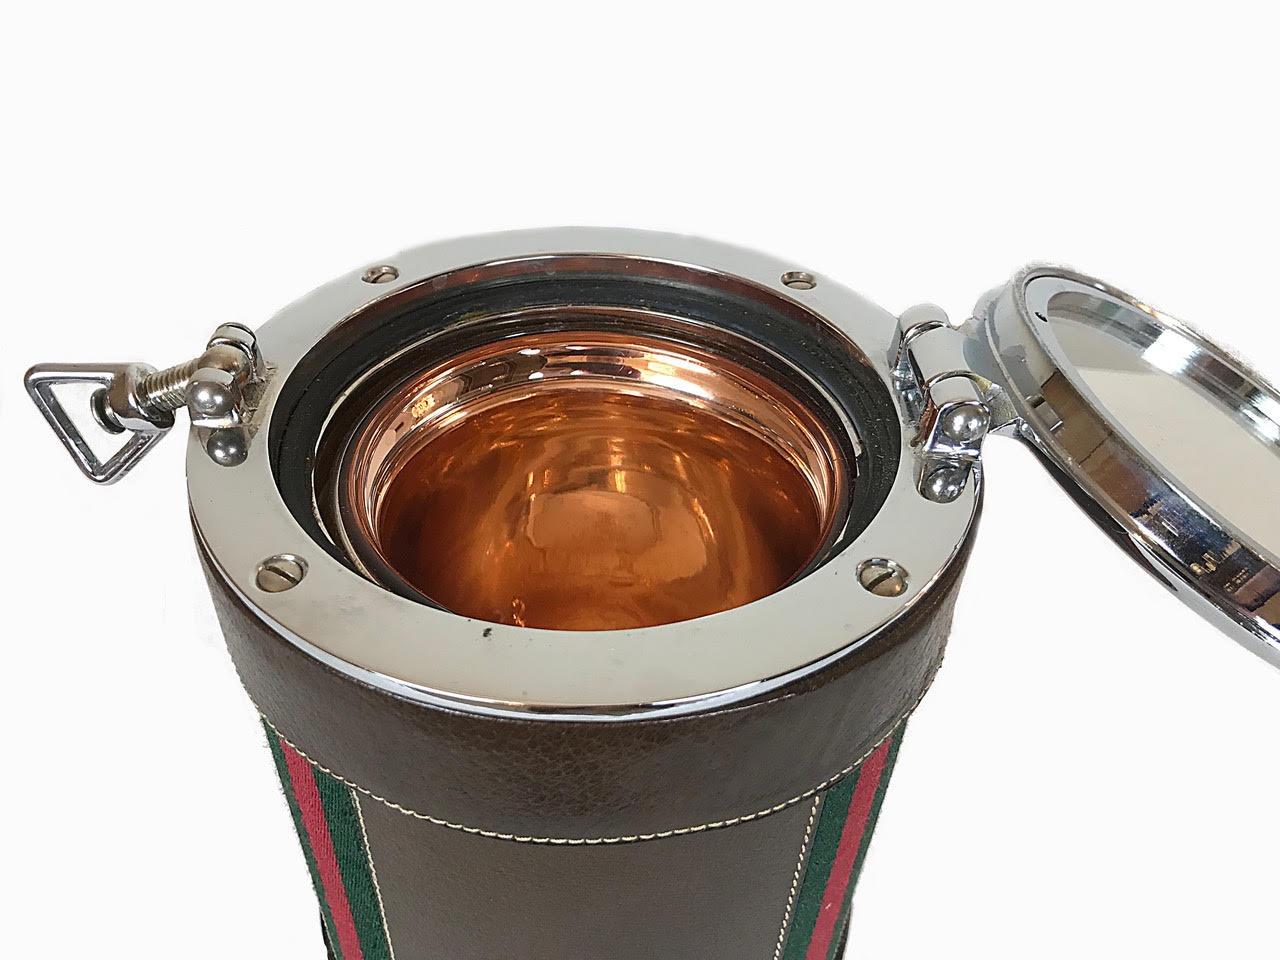 A fabulous ice bucket with lockable lid made for Gucci. The barrel is covered in leather with the stripes of the designer in green and red. There is a Gucci sticker on the bottom.